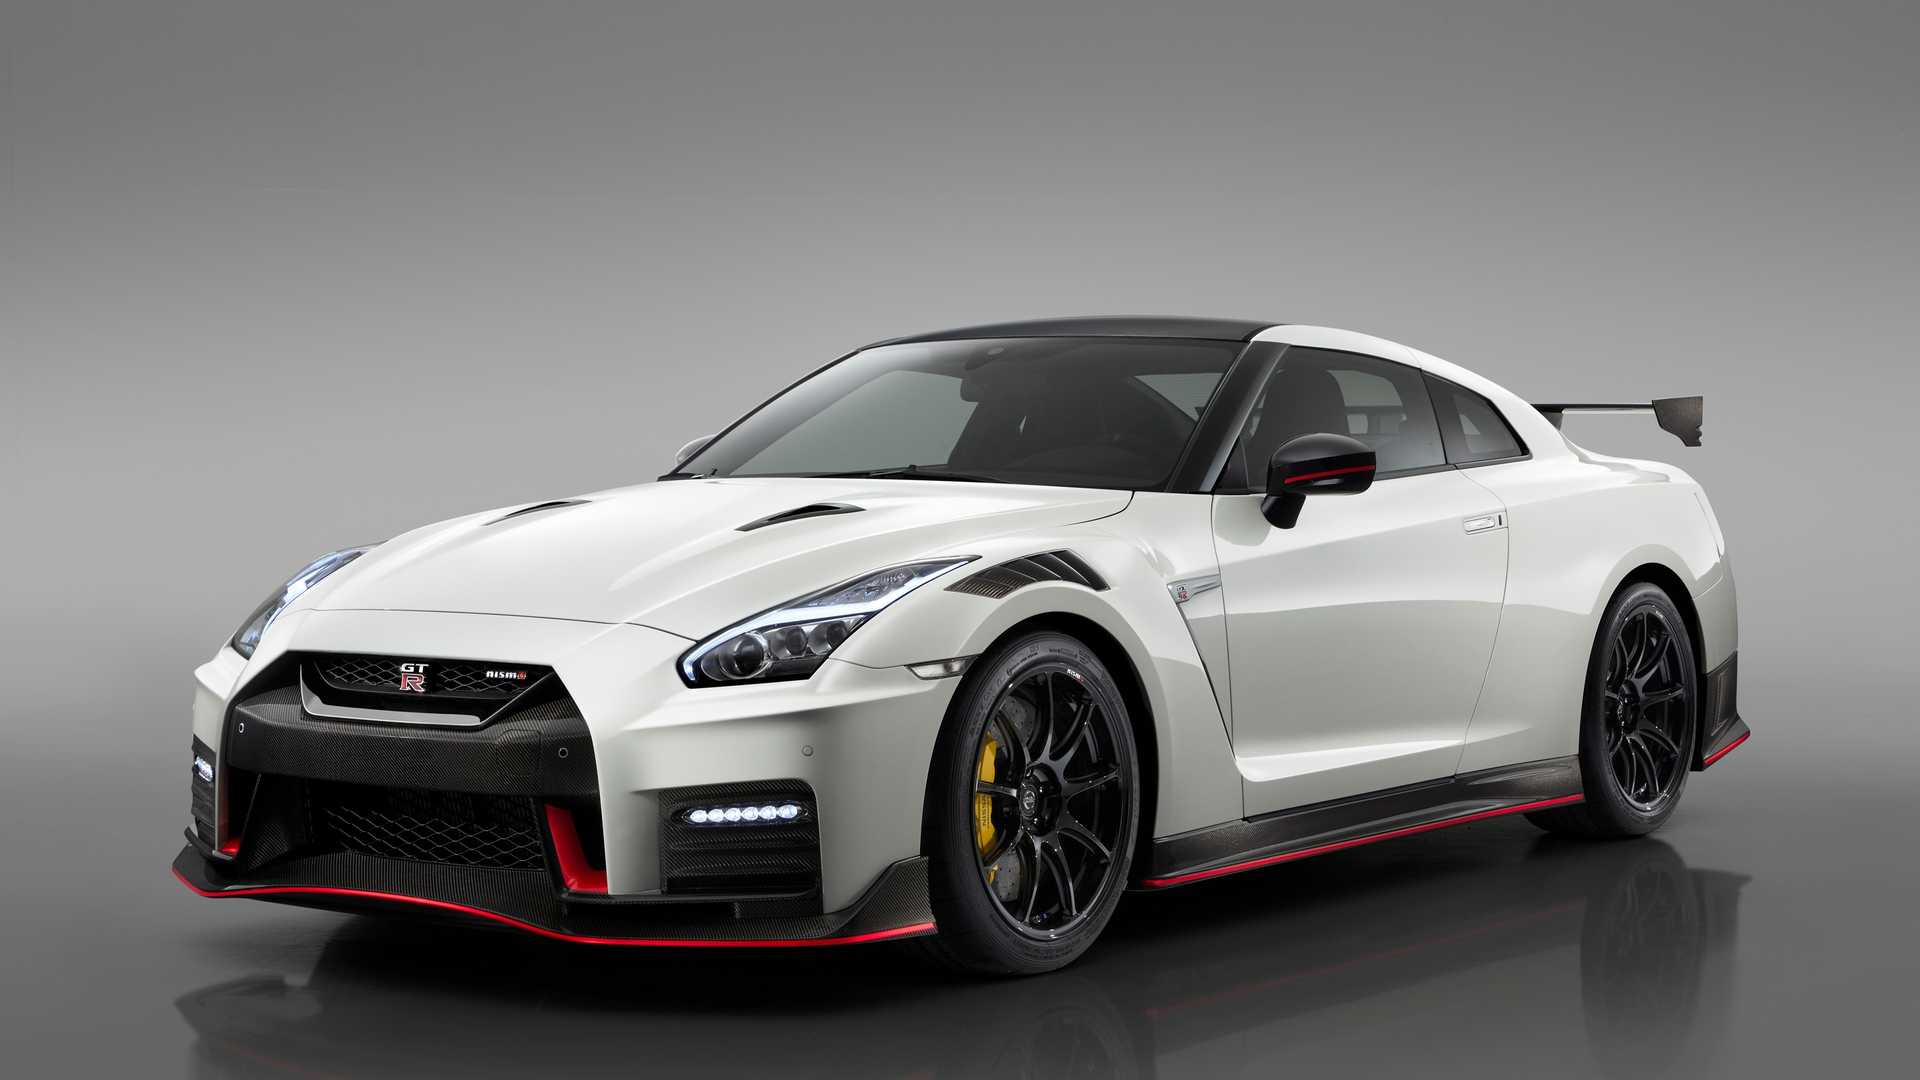 Nissan GT-R one of the most Instagram able or Insta-worthy cars among on social media 